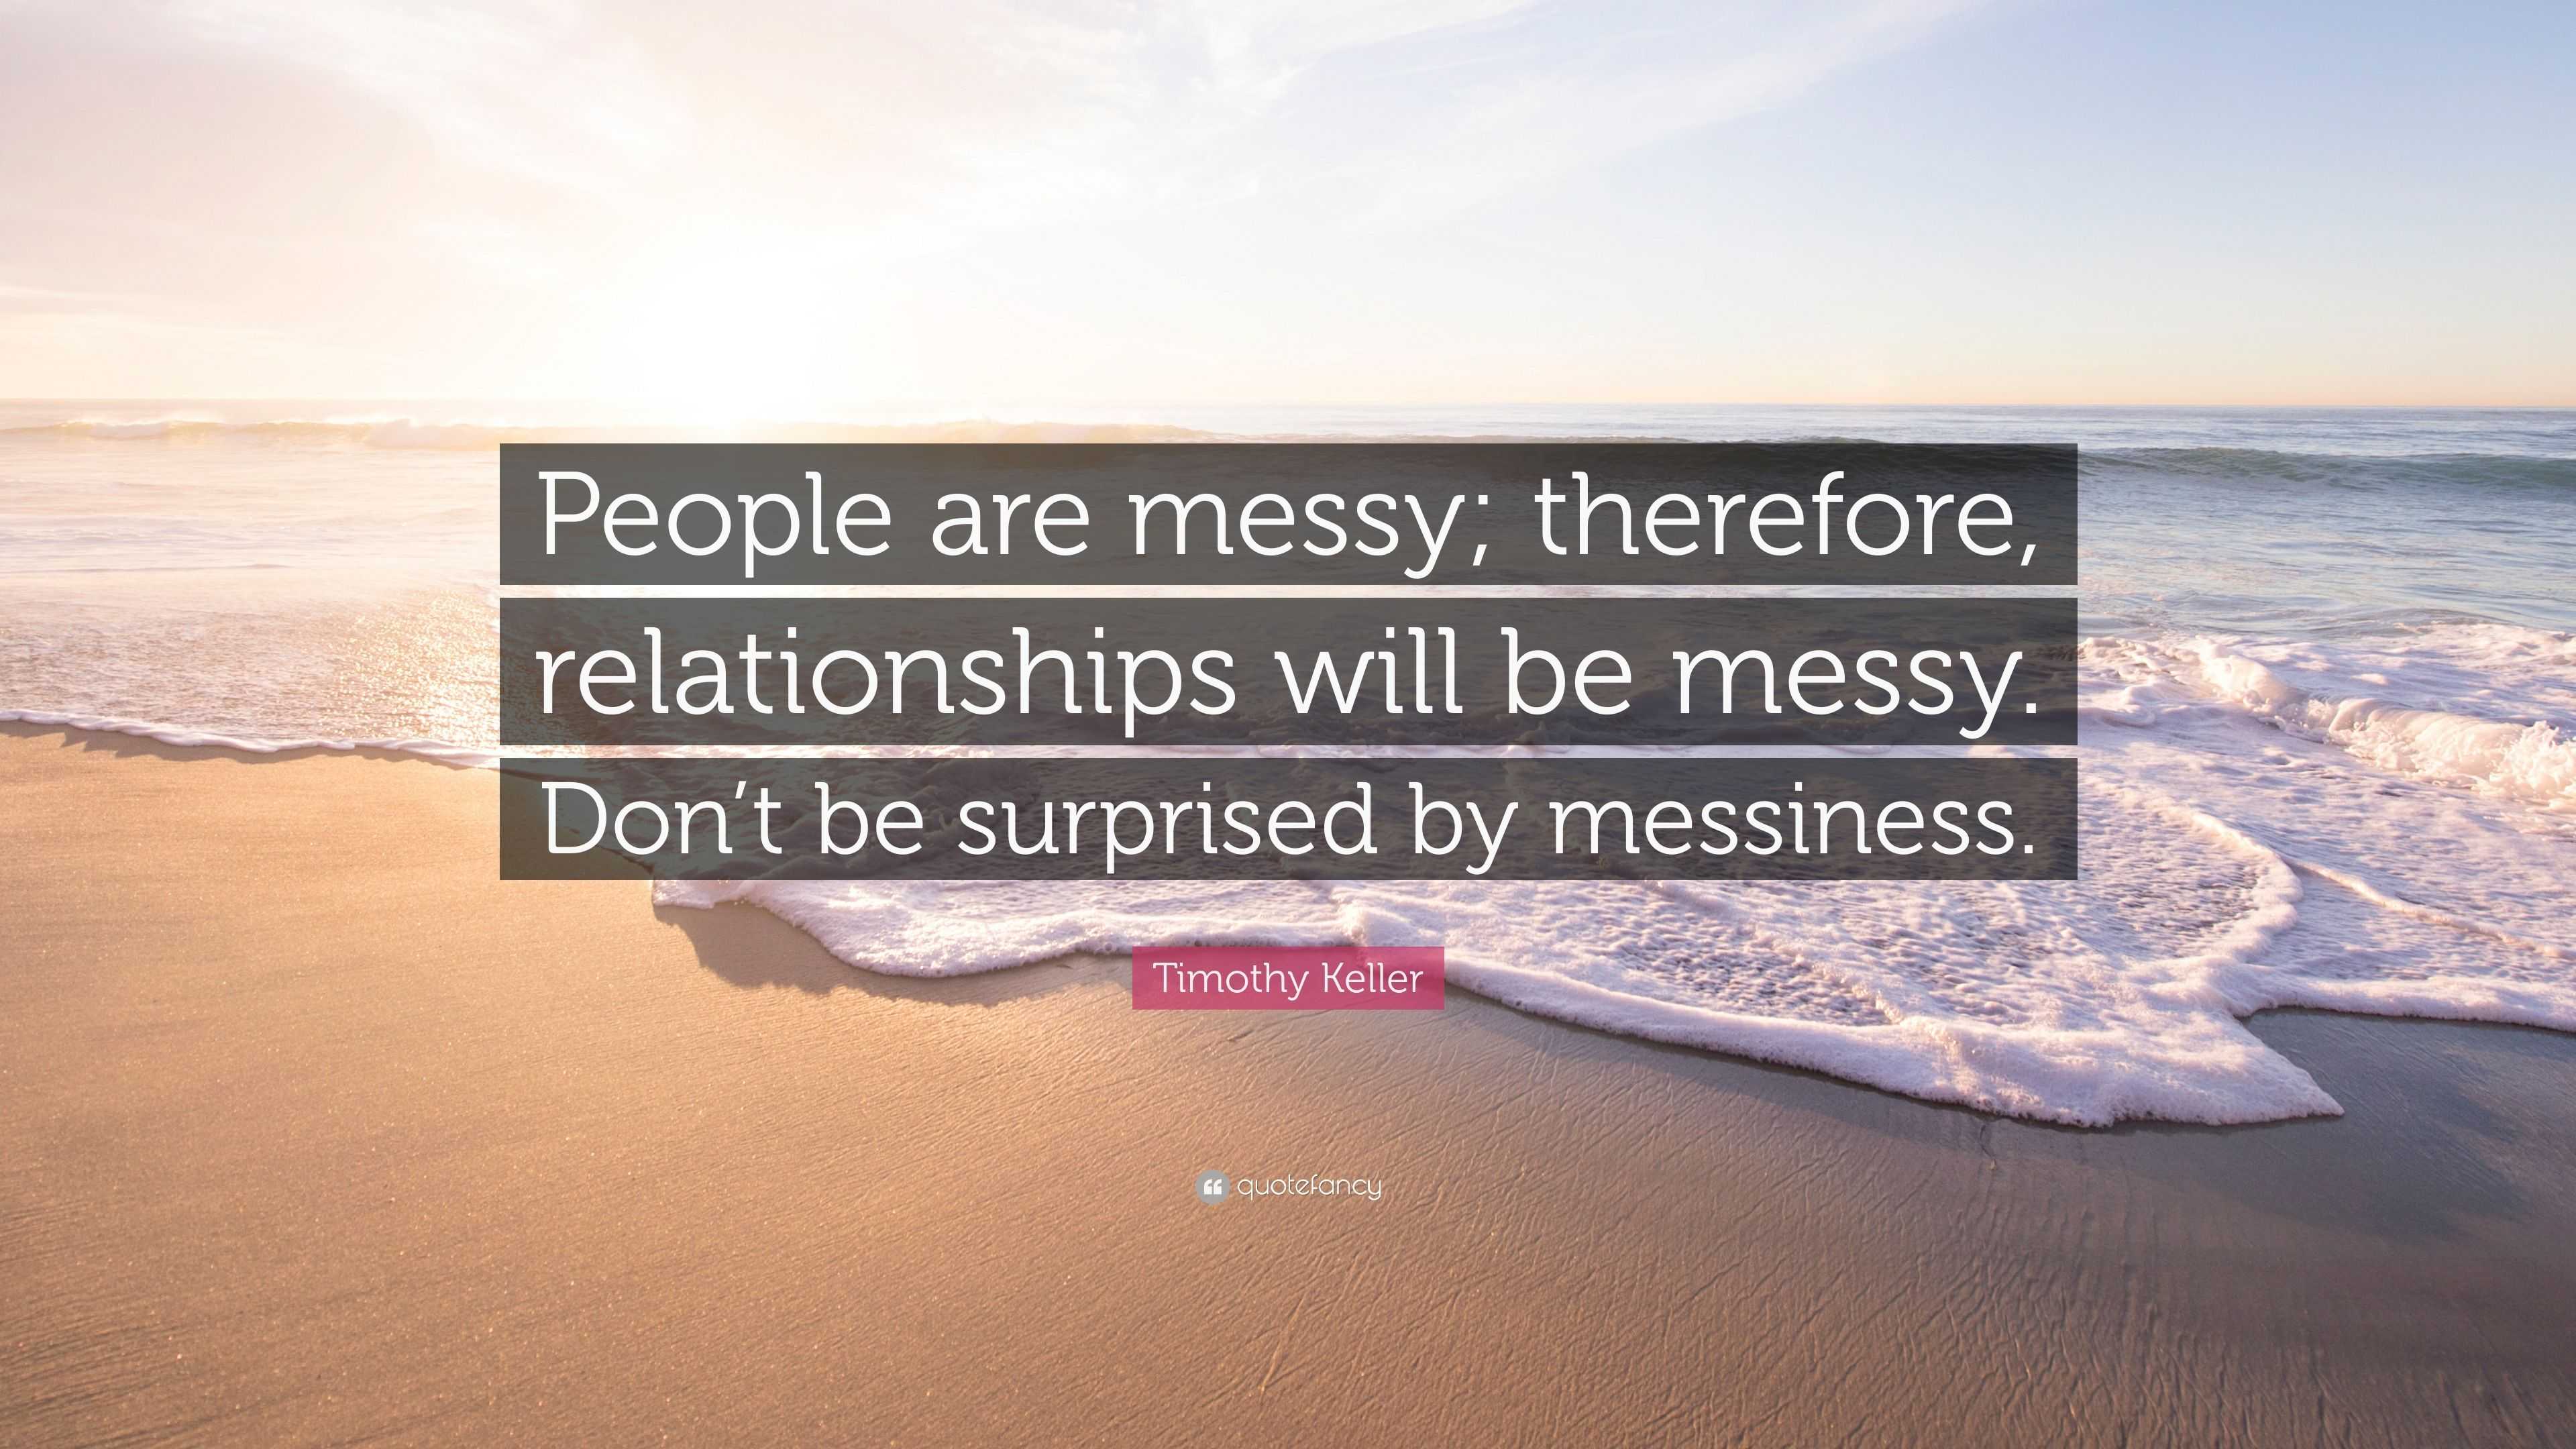 Timothy Keller Quote “People are messy; therefore, relationships will